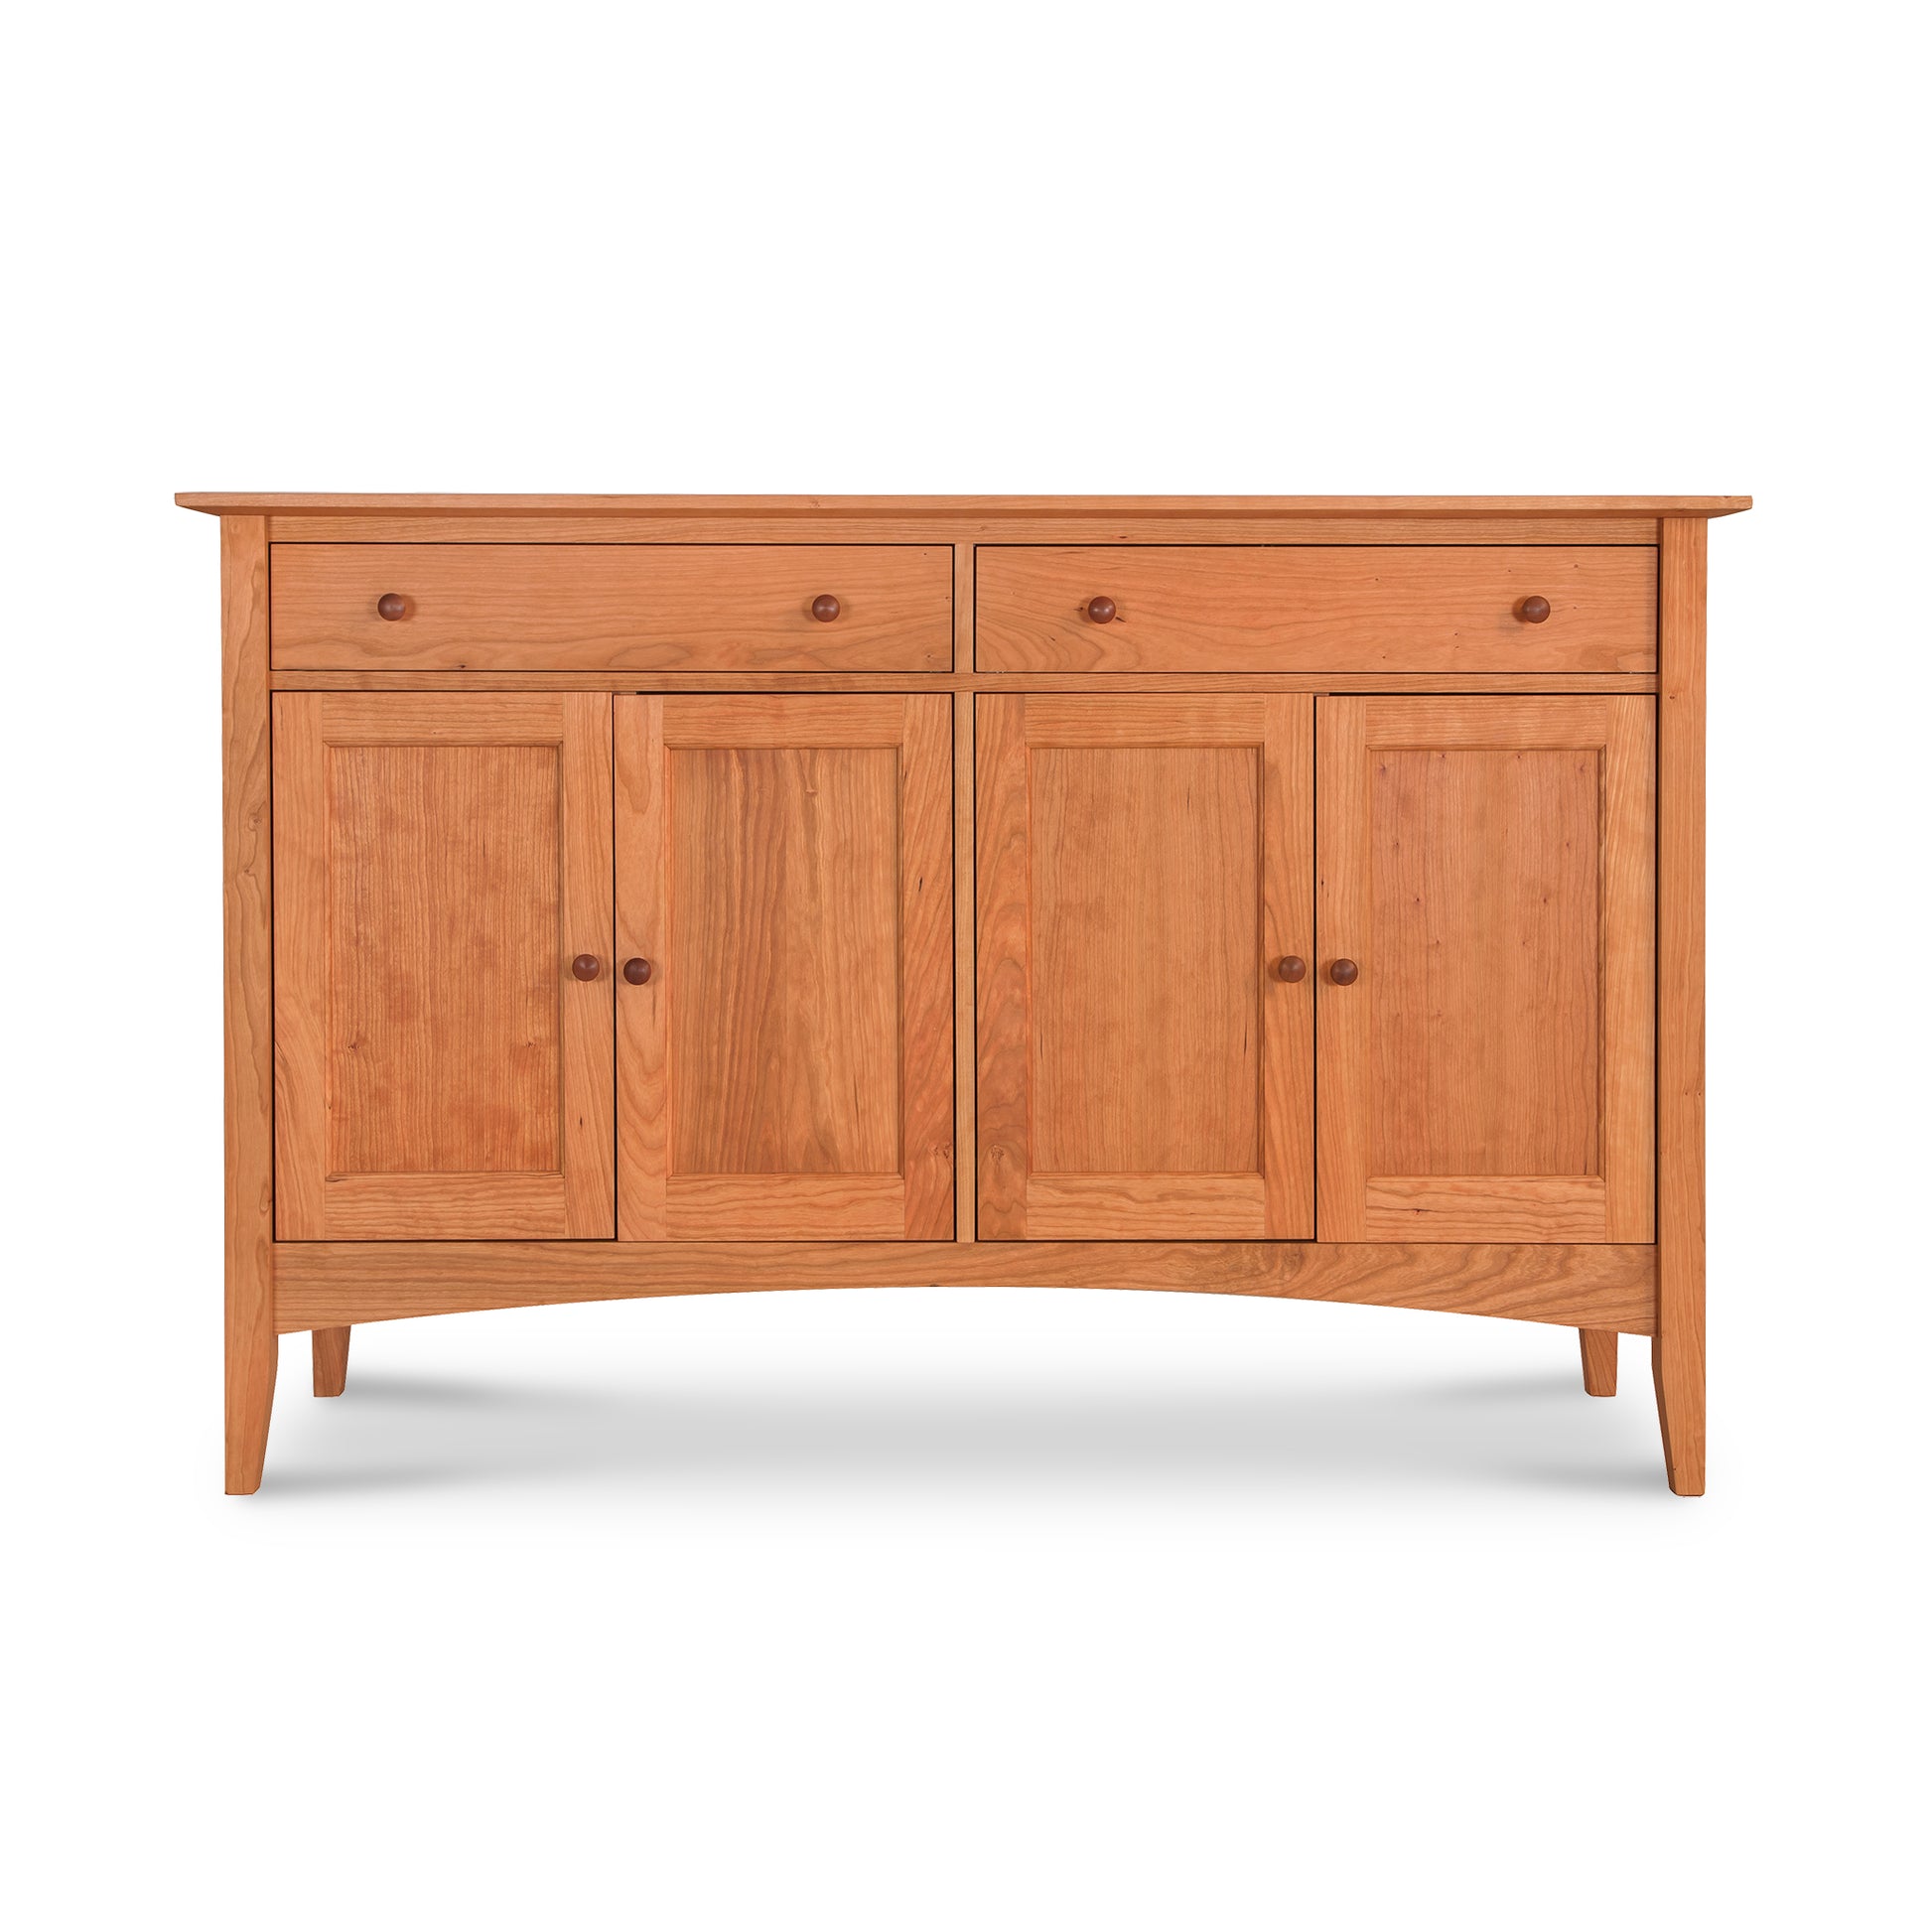 A Maple Corner Woodworks American Shaker large sideboard, showcasing Vermont craftsmanship with solid hardwood construction.